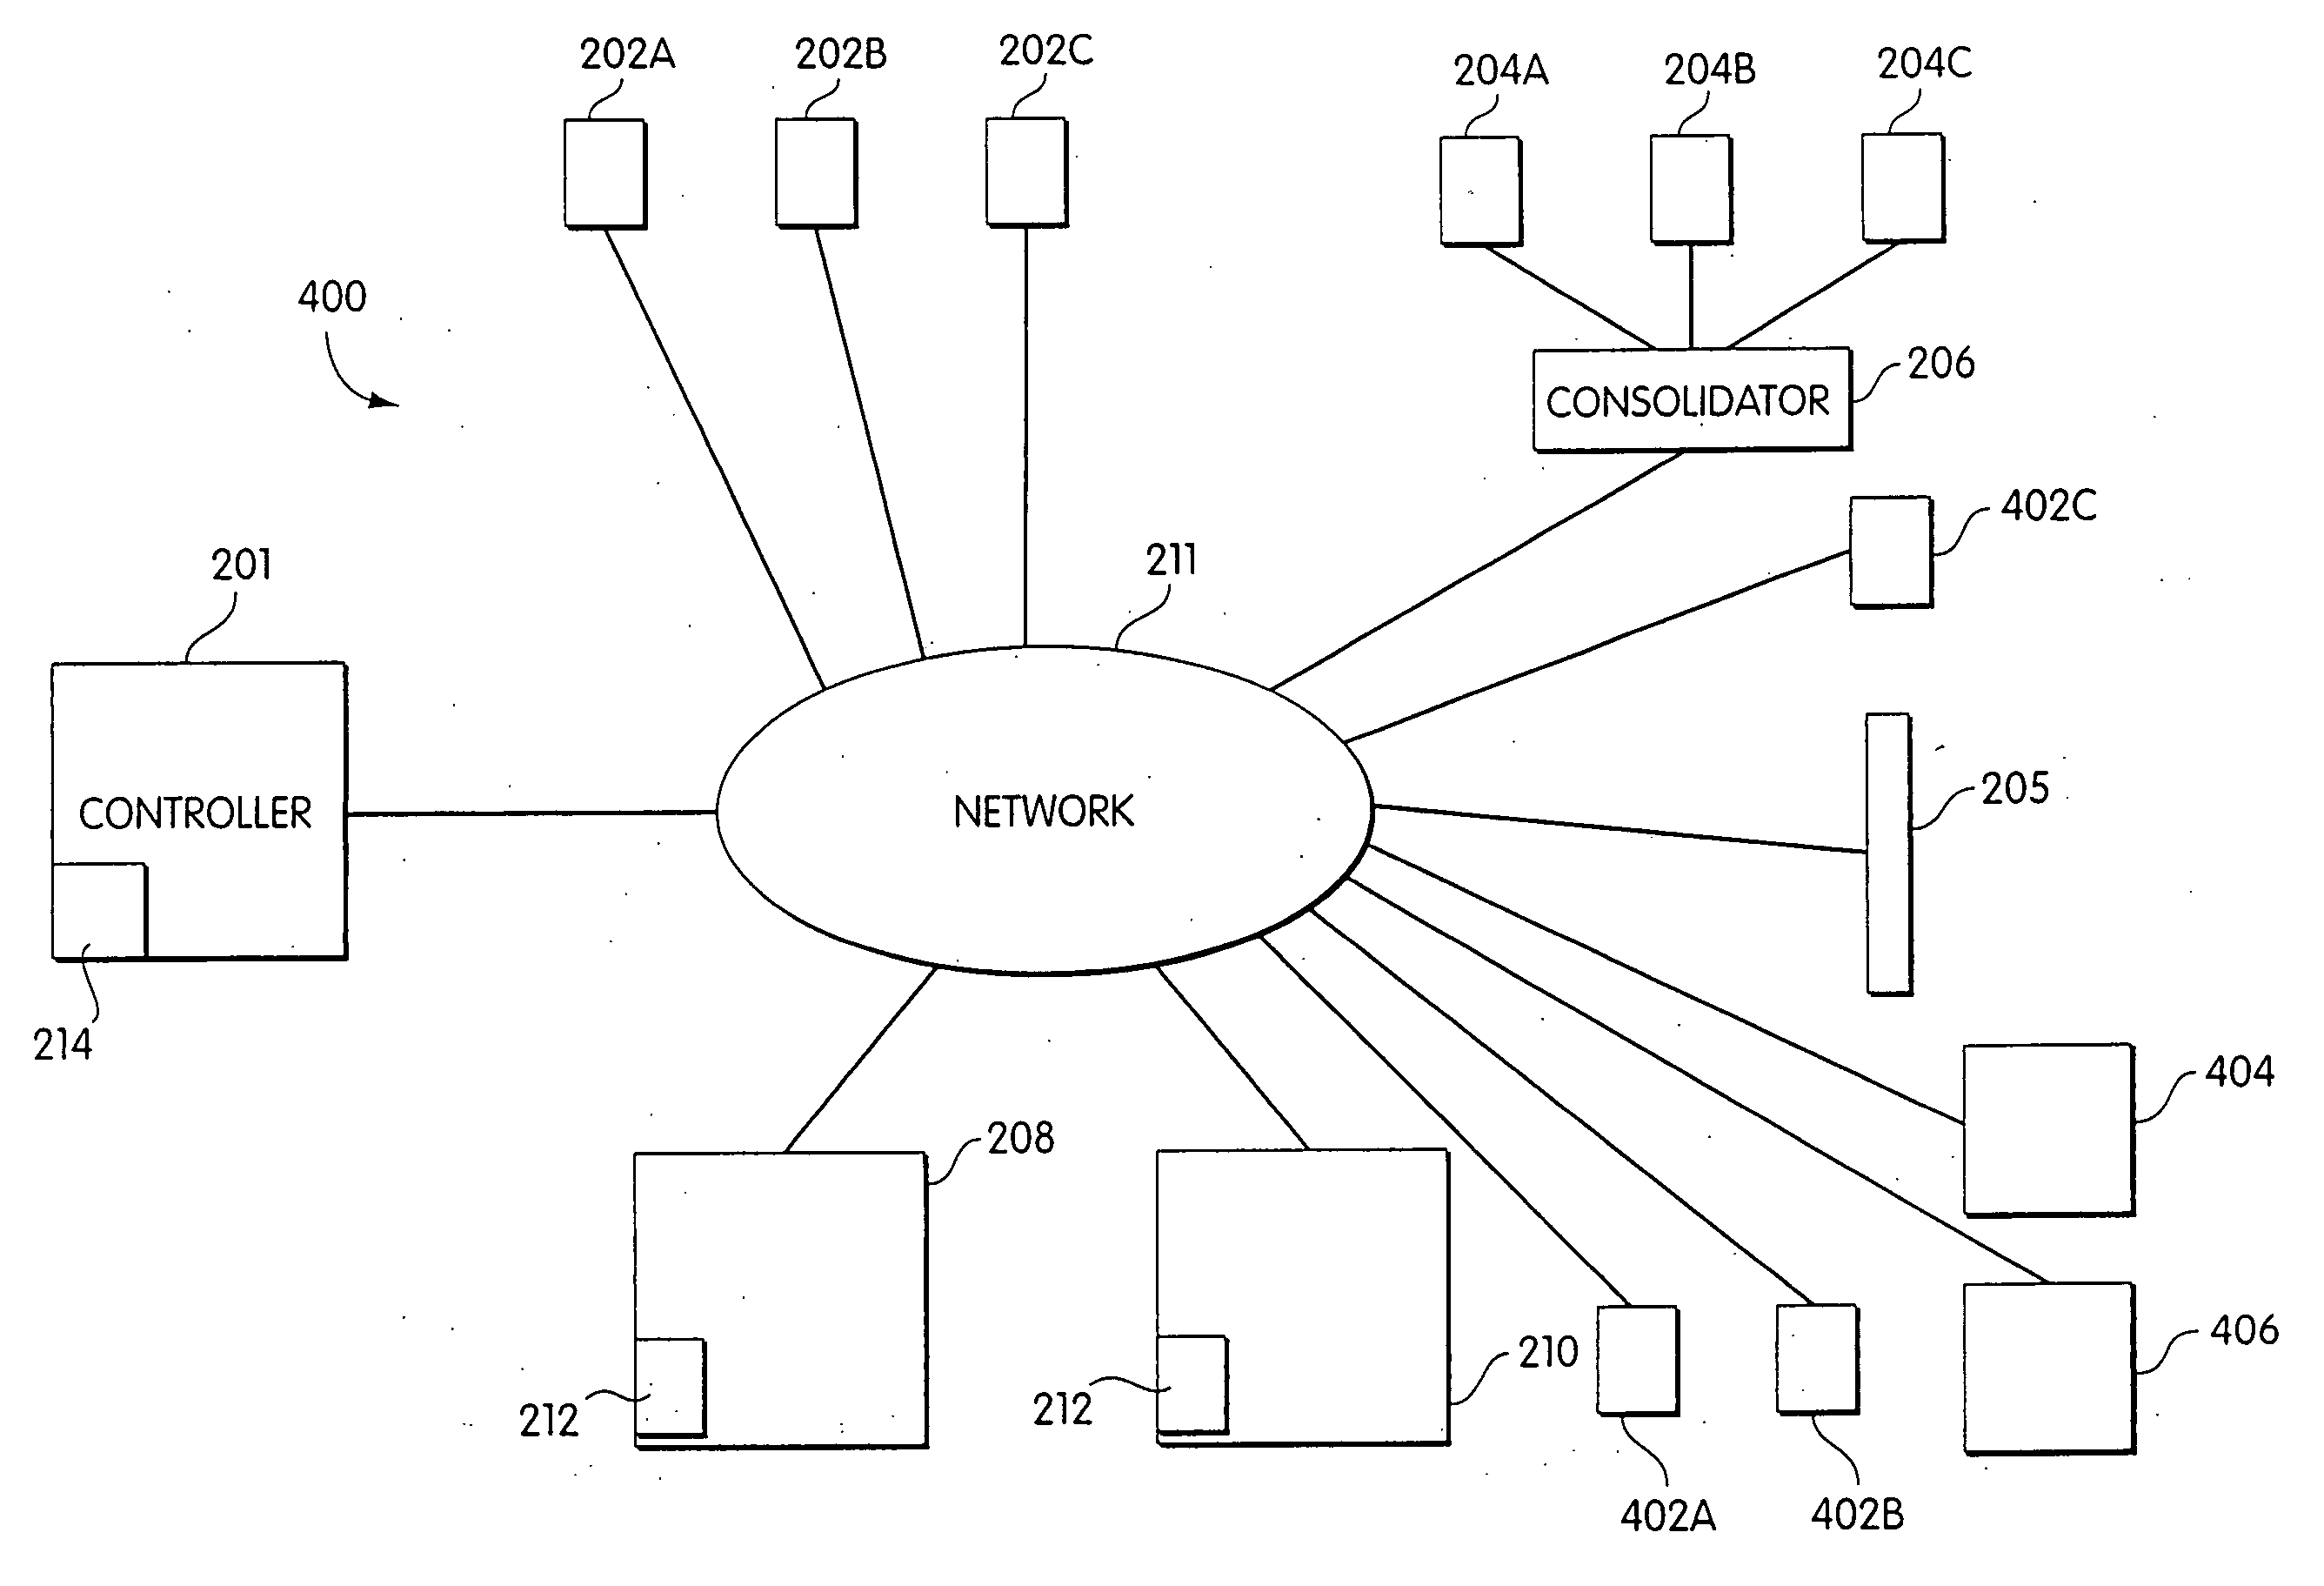 Method and apparatus for preventing overloads of power distribution networks